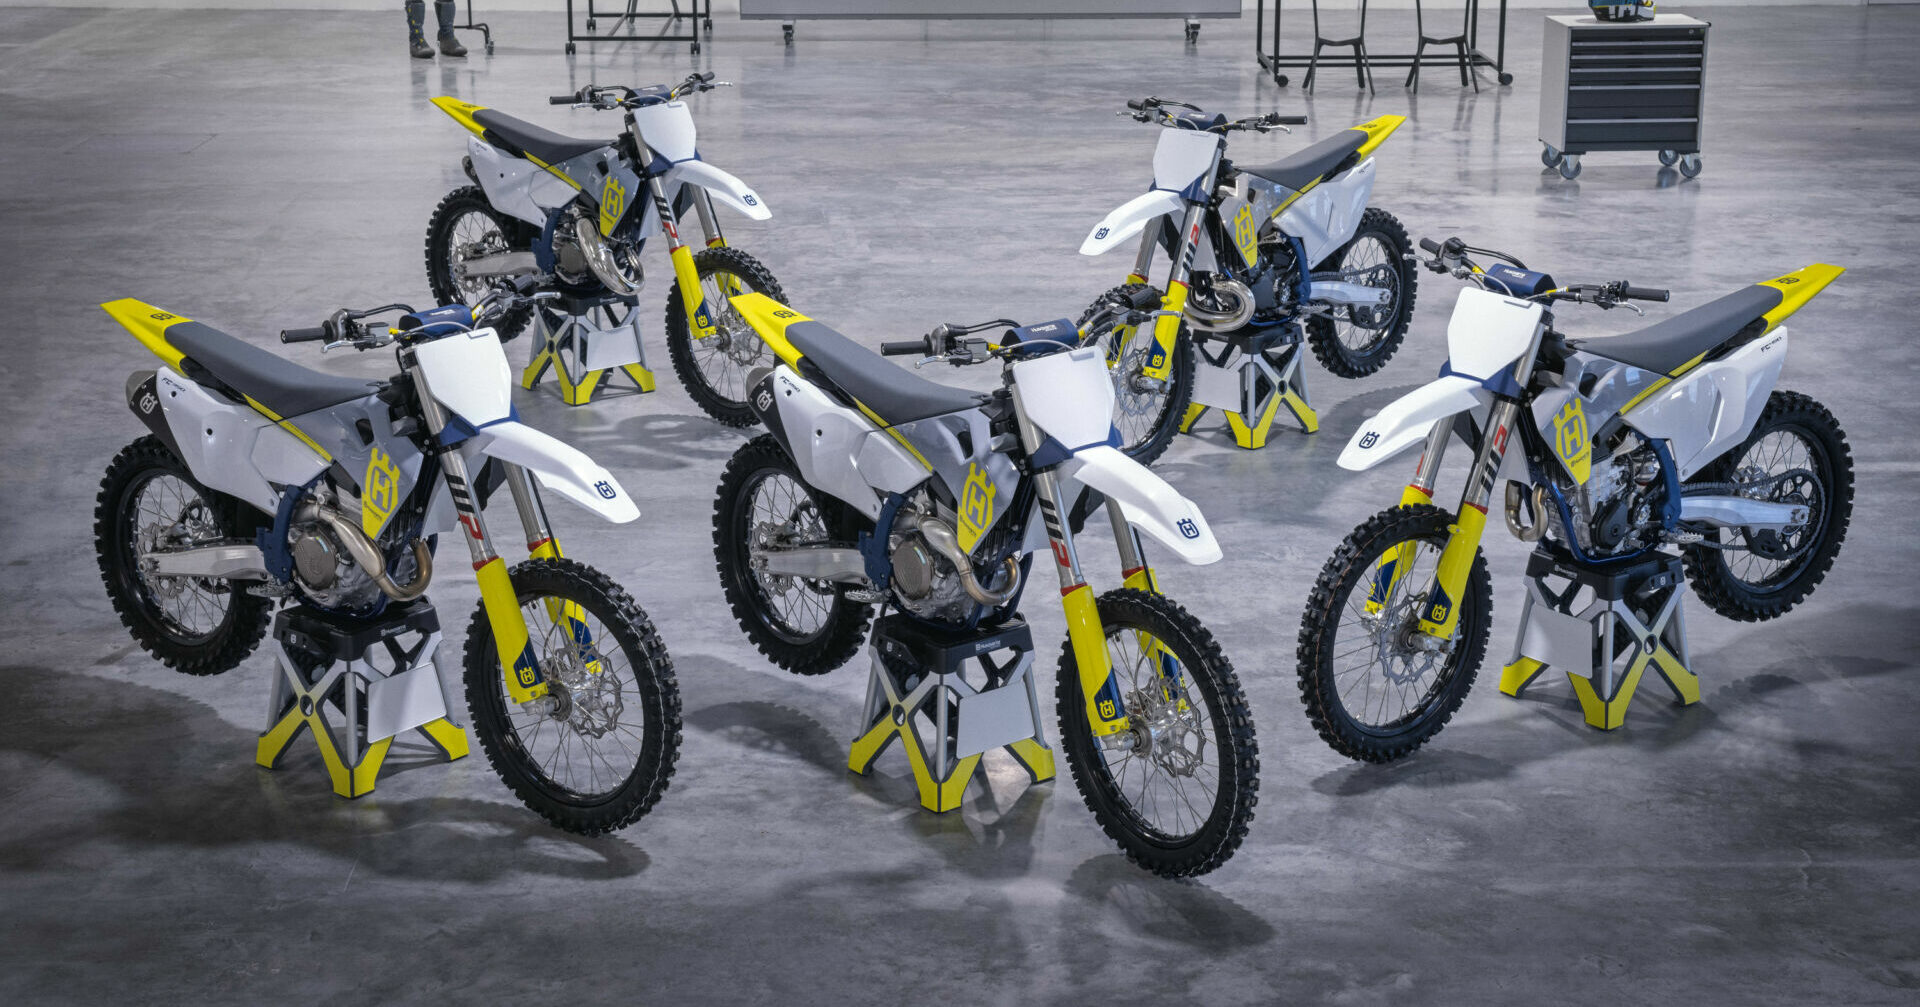 Husqvarna Introduces 23 Motocross And Cross Country Models Roadracing World Magazine Motorcycle Riding Racing Tech News